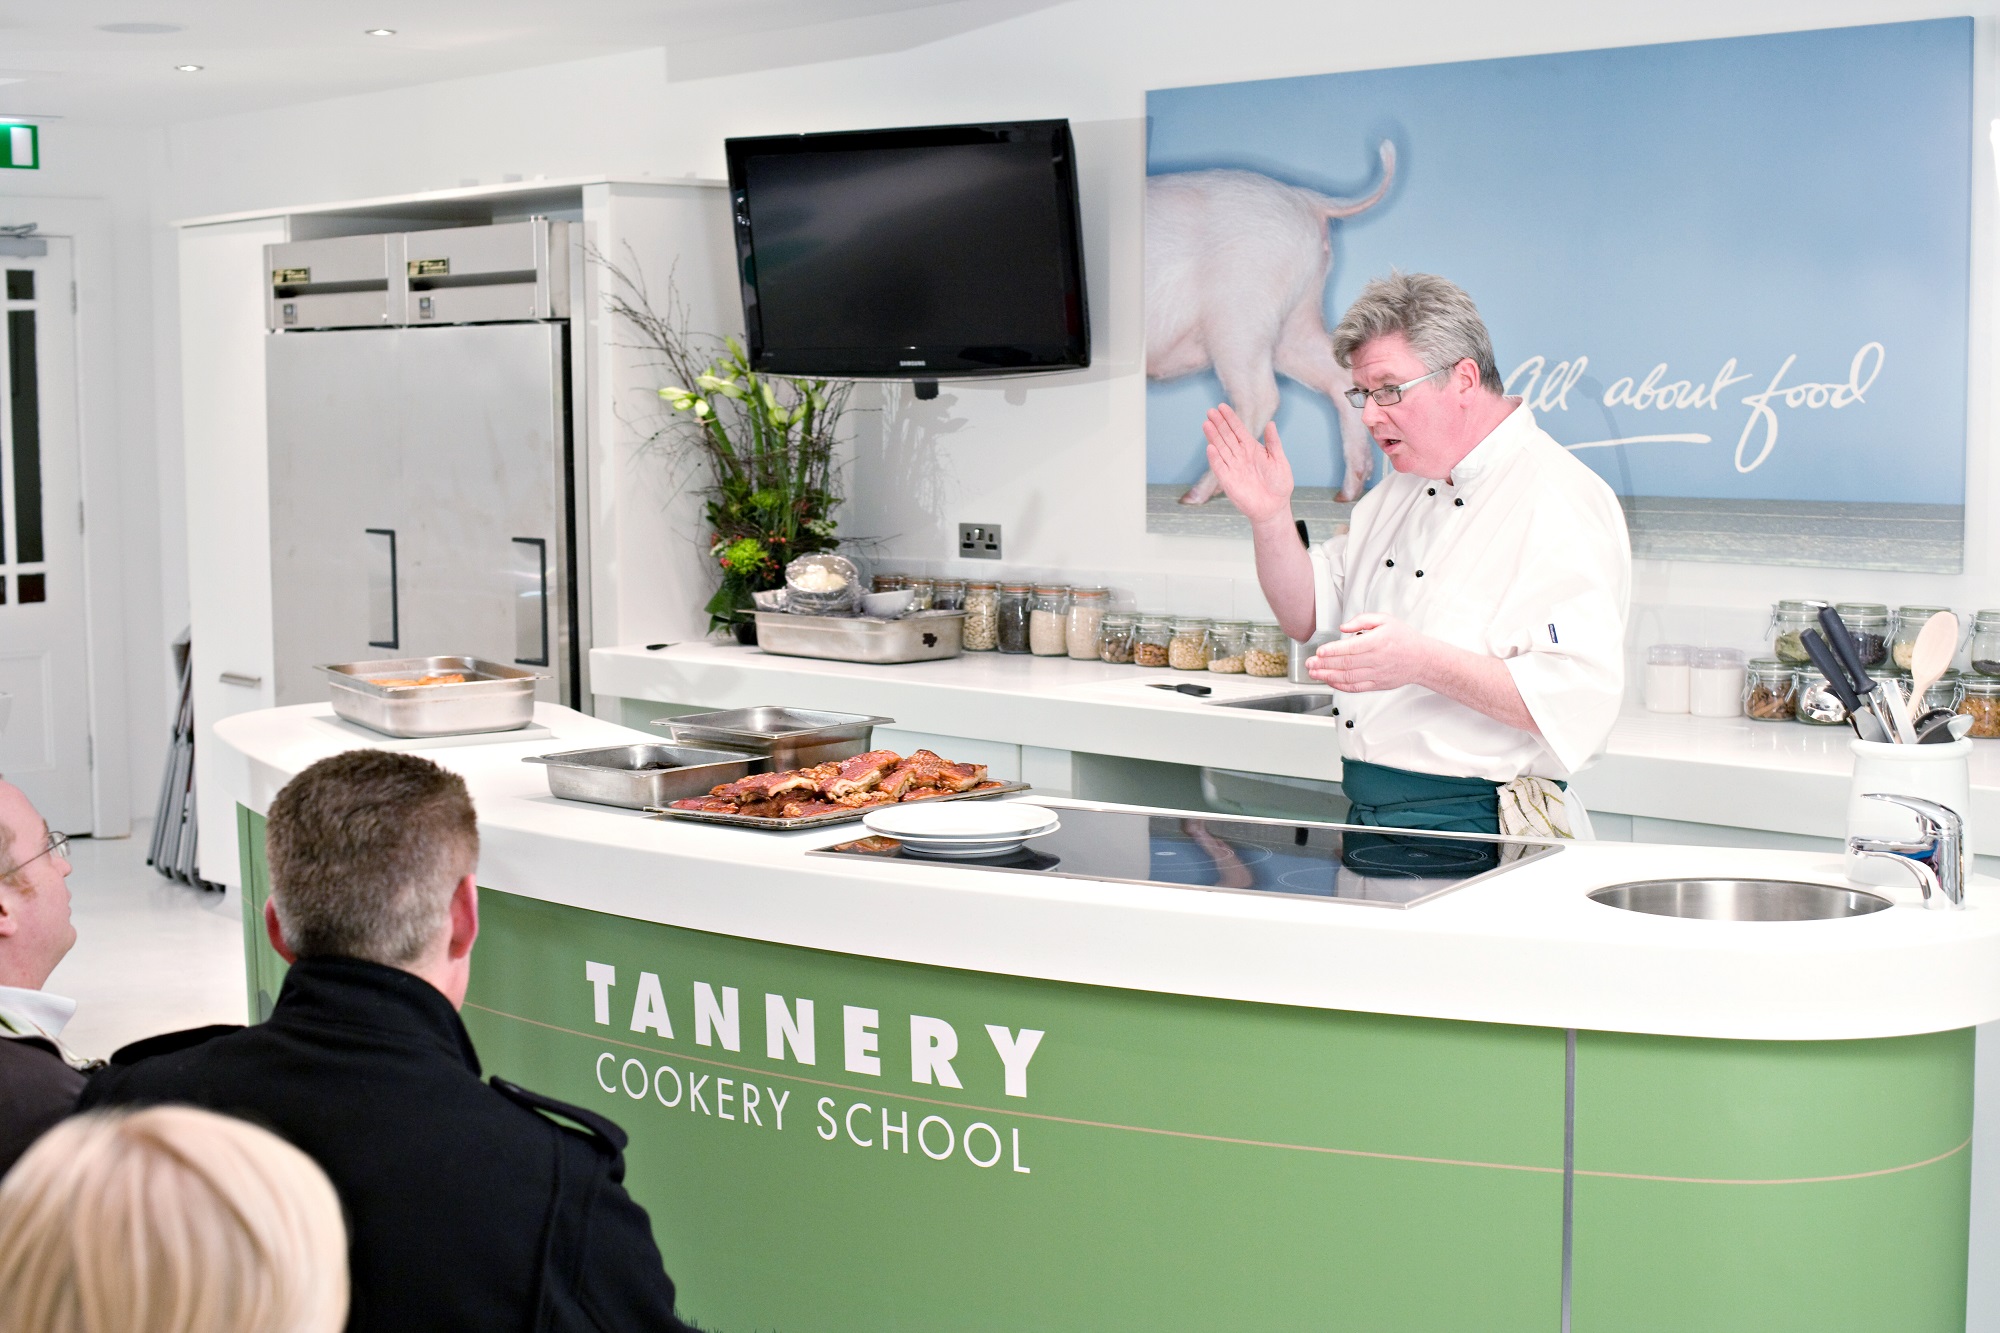 The Tannery Cookery School